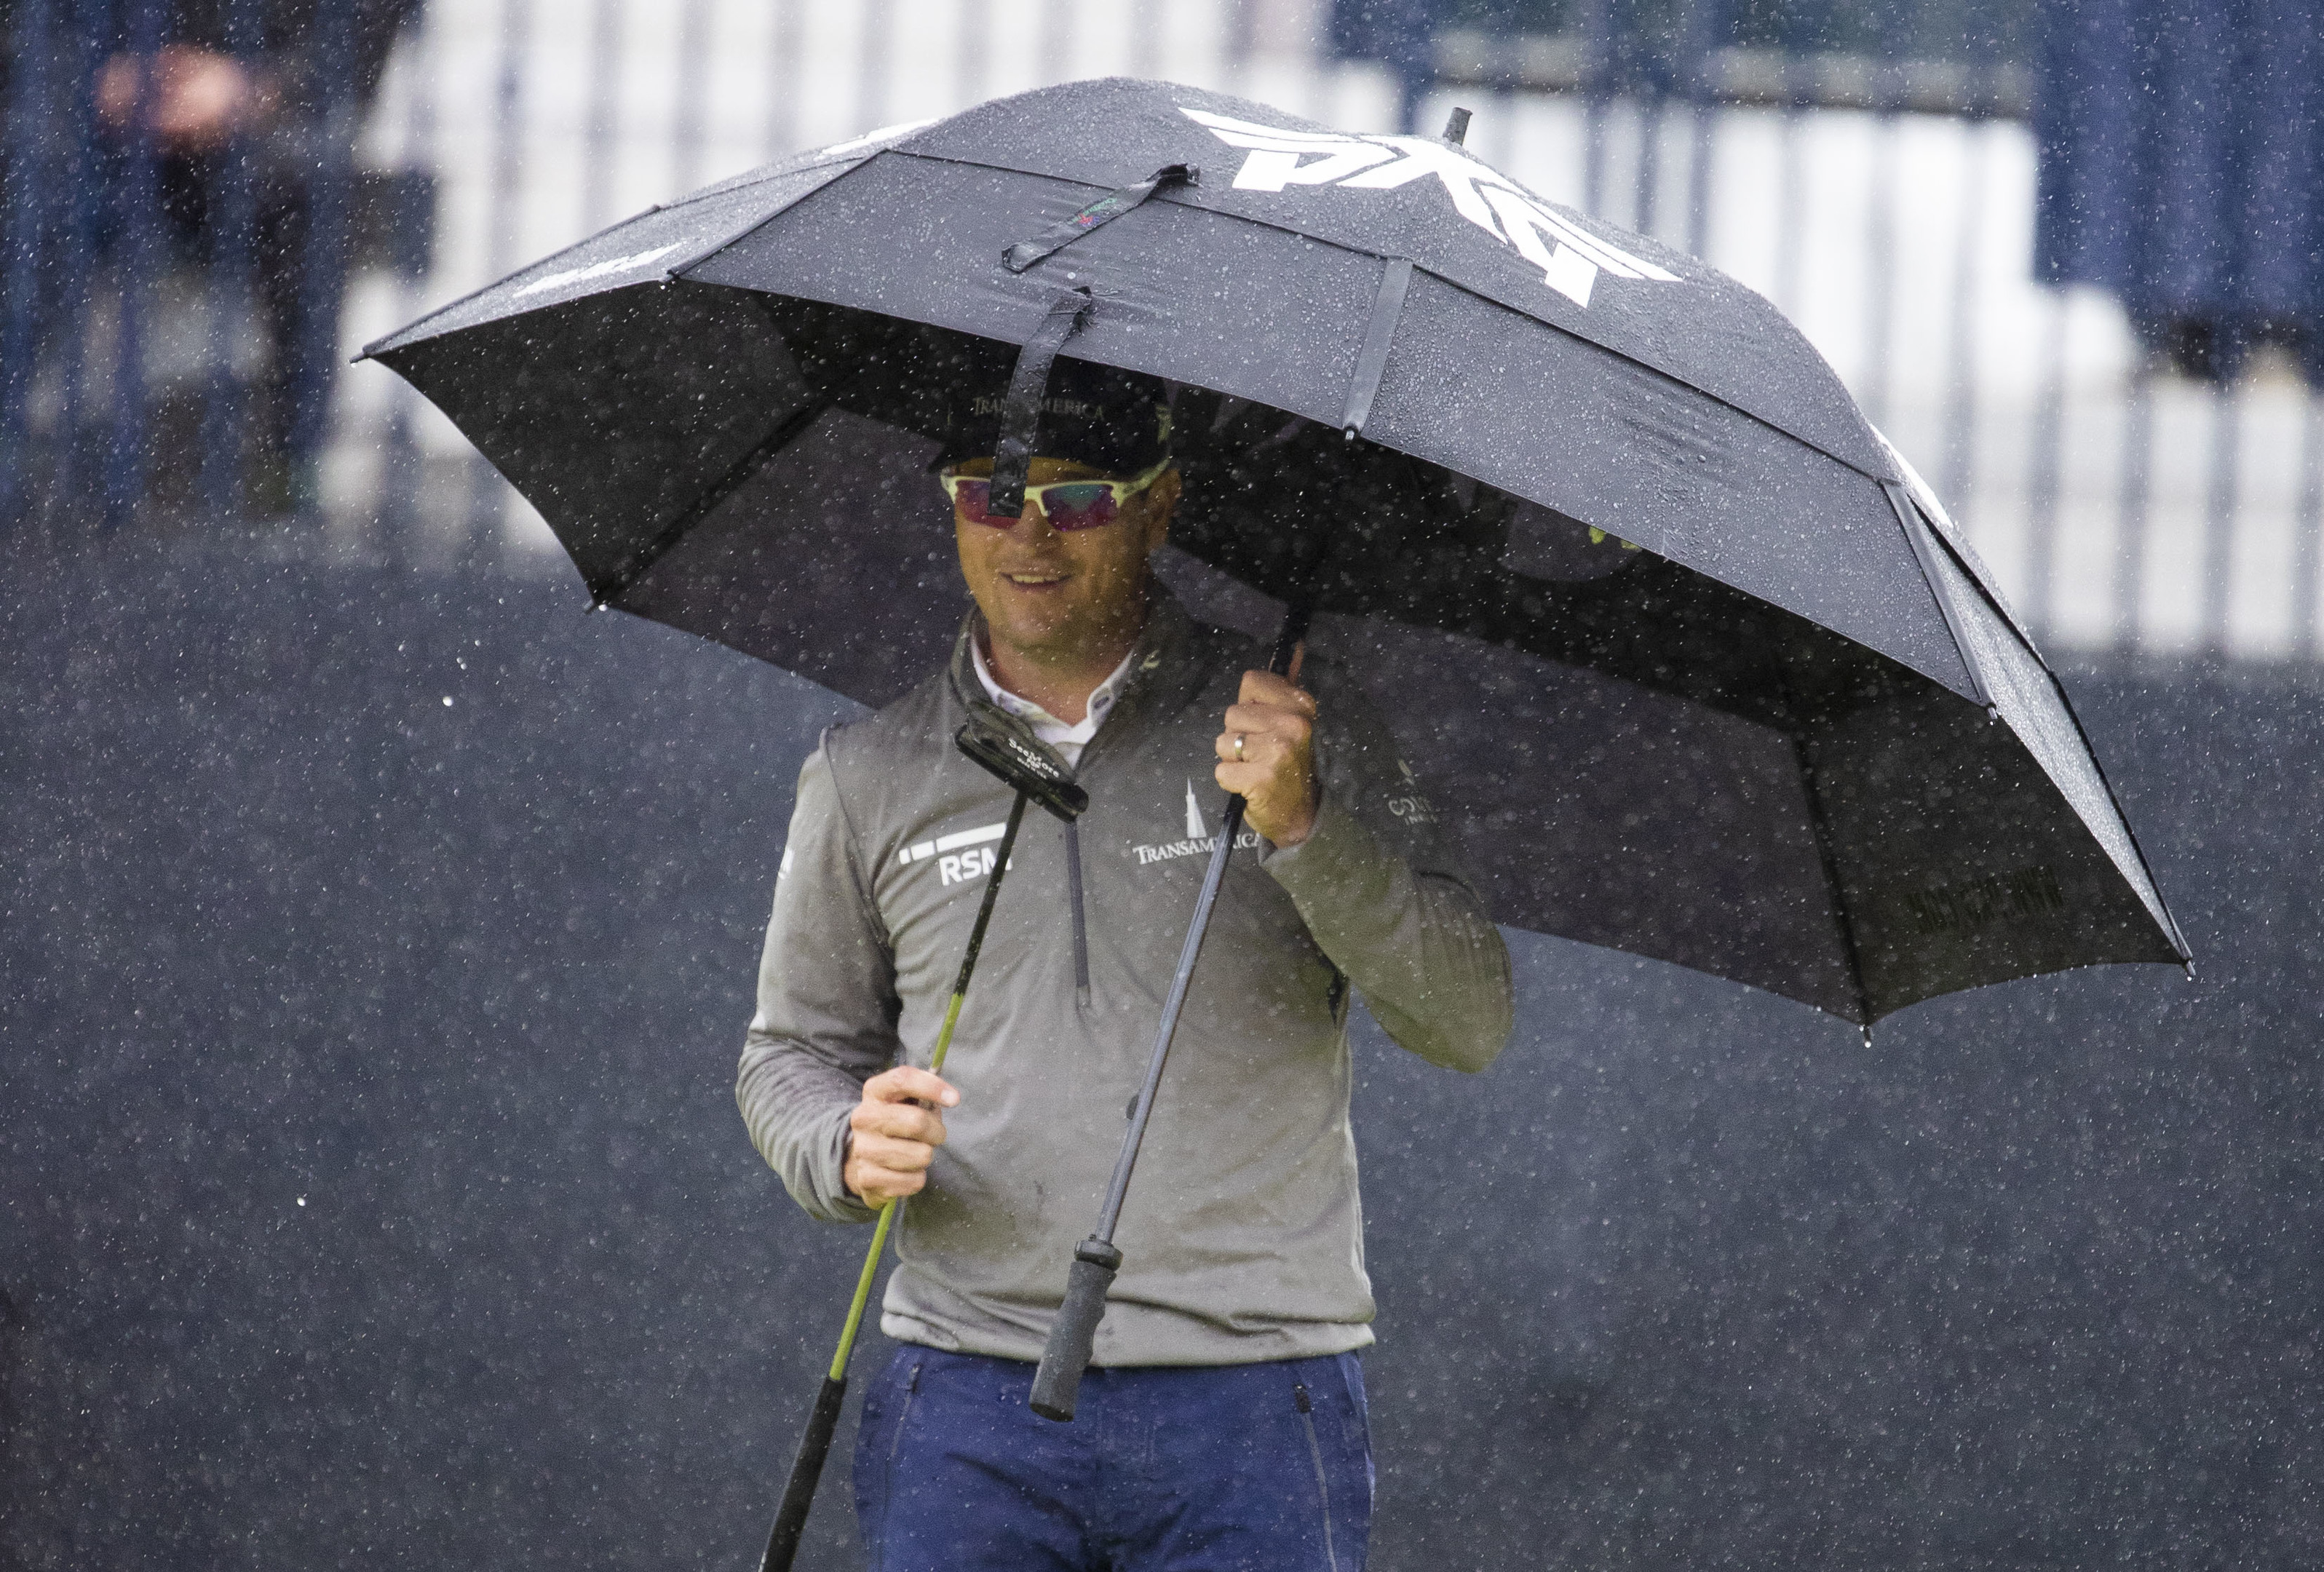 Zach Johnson came through the rain to share the lead at the Open at Carnoustie.